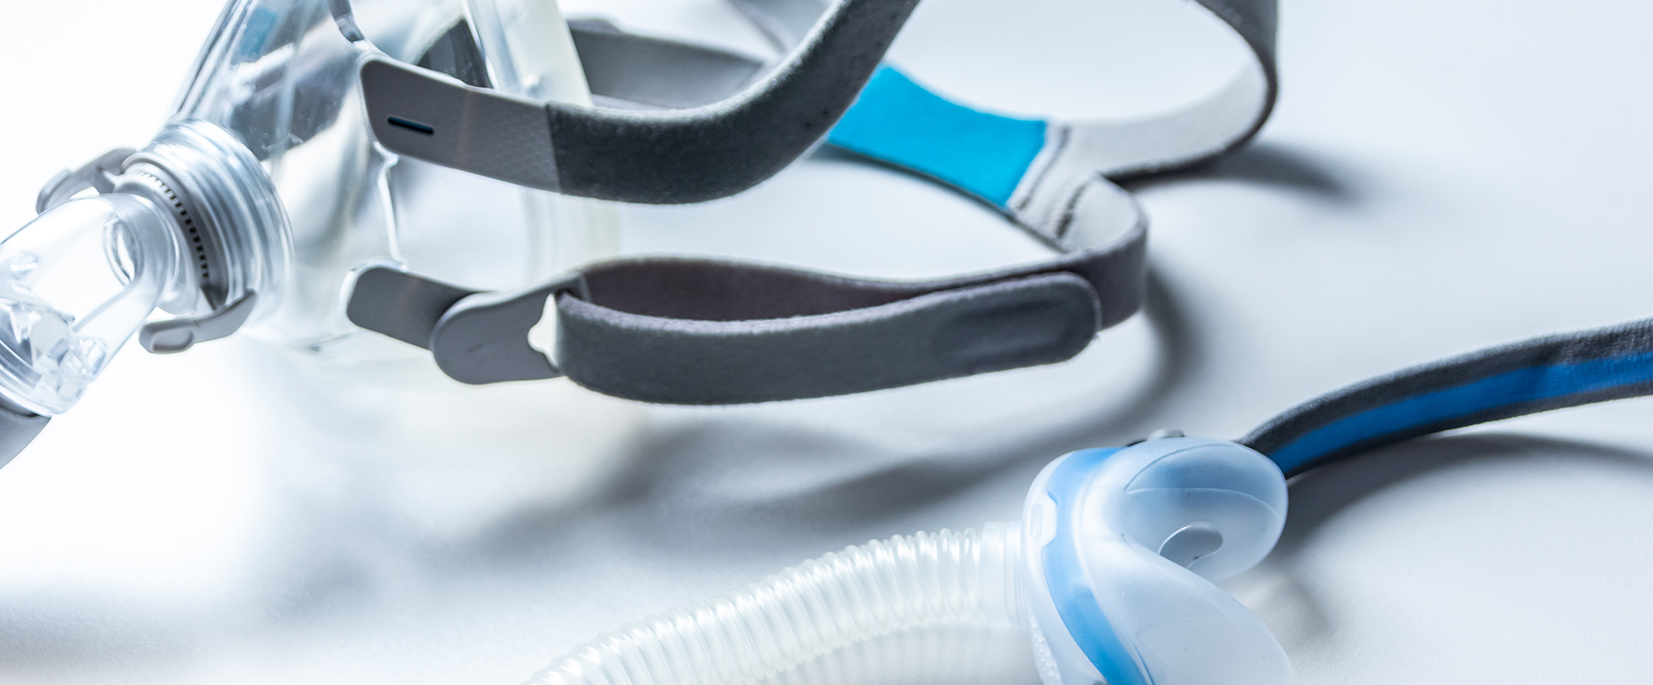 Common CPAP Mask Types and How to Select the Best One for You